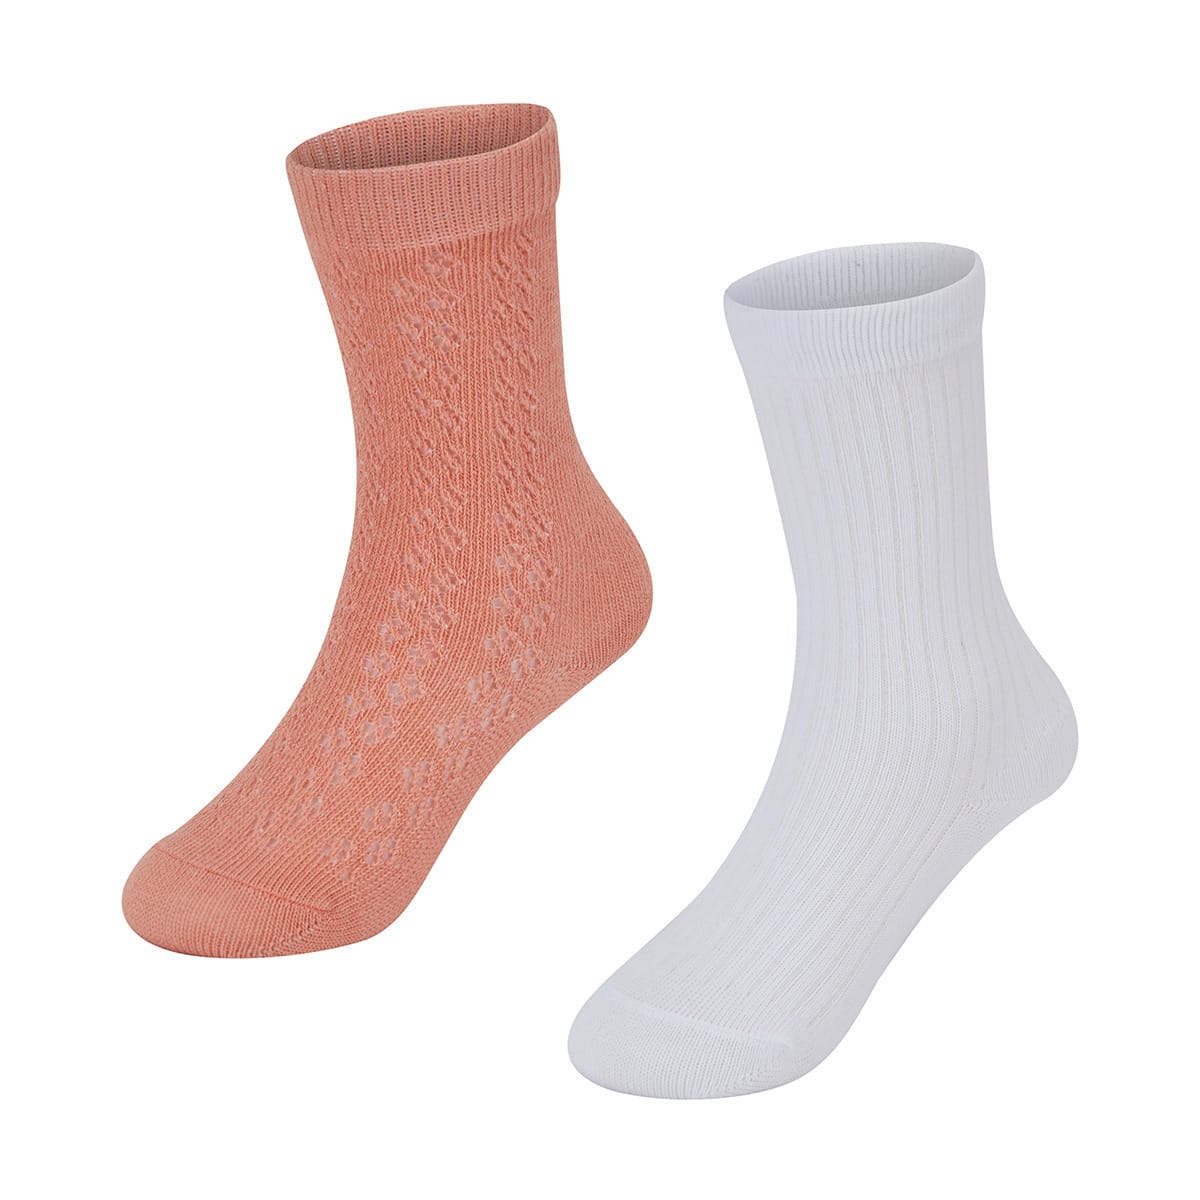 PINK OR WHITE BABY OR REBORN DOLL PLAIN SOCKS.IN 2 COLOURS,MORE SOCKS AVAILABLE. 